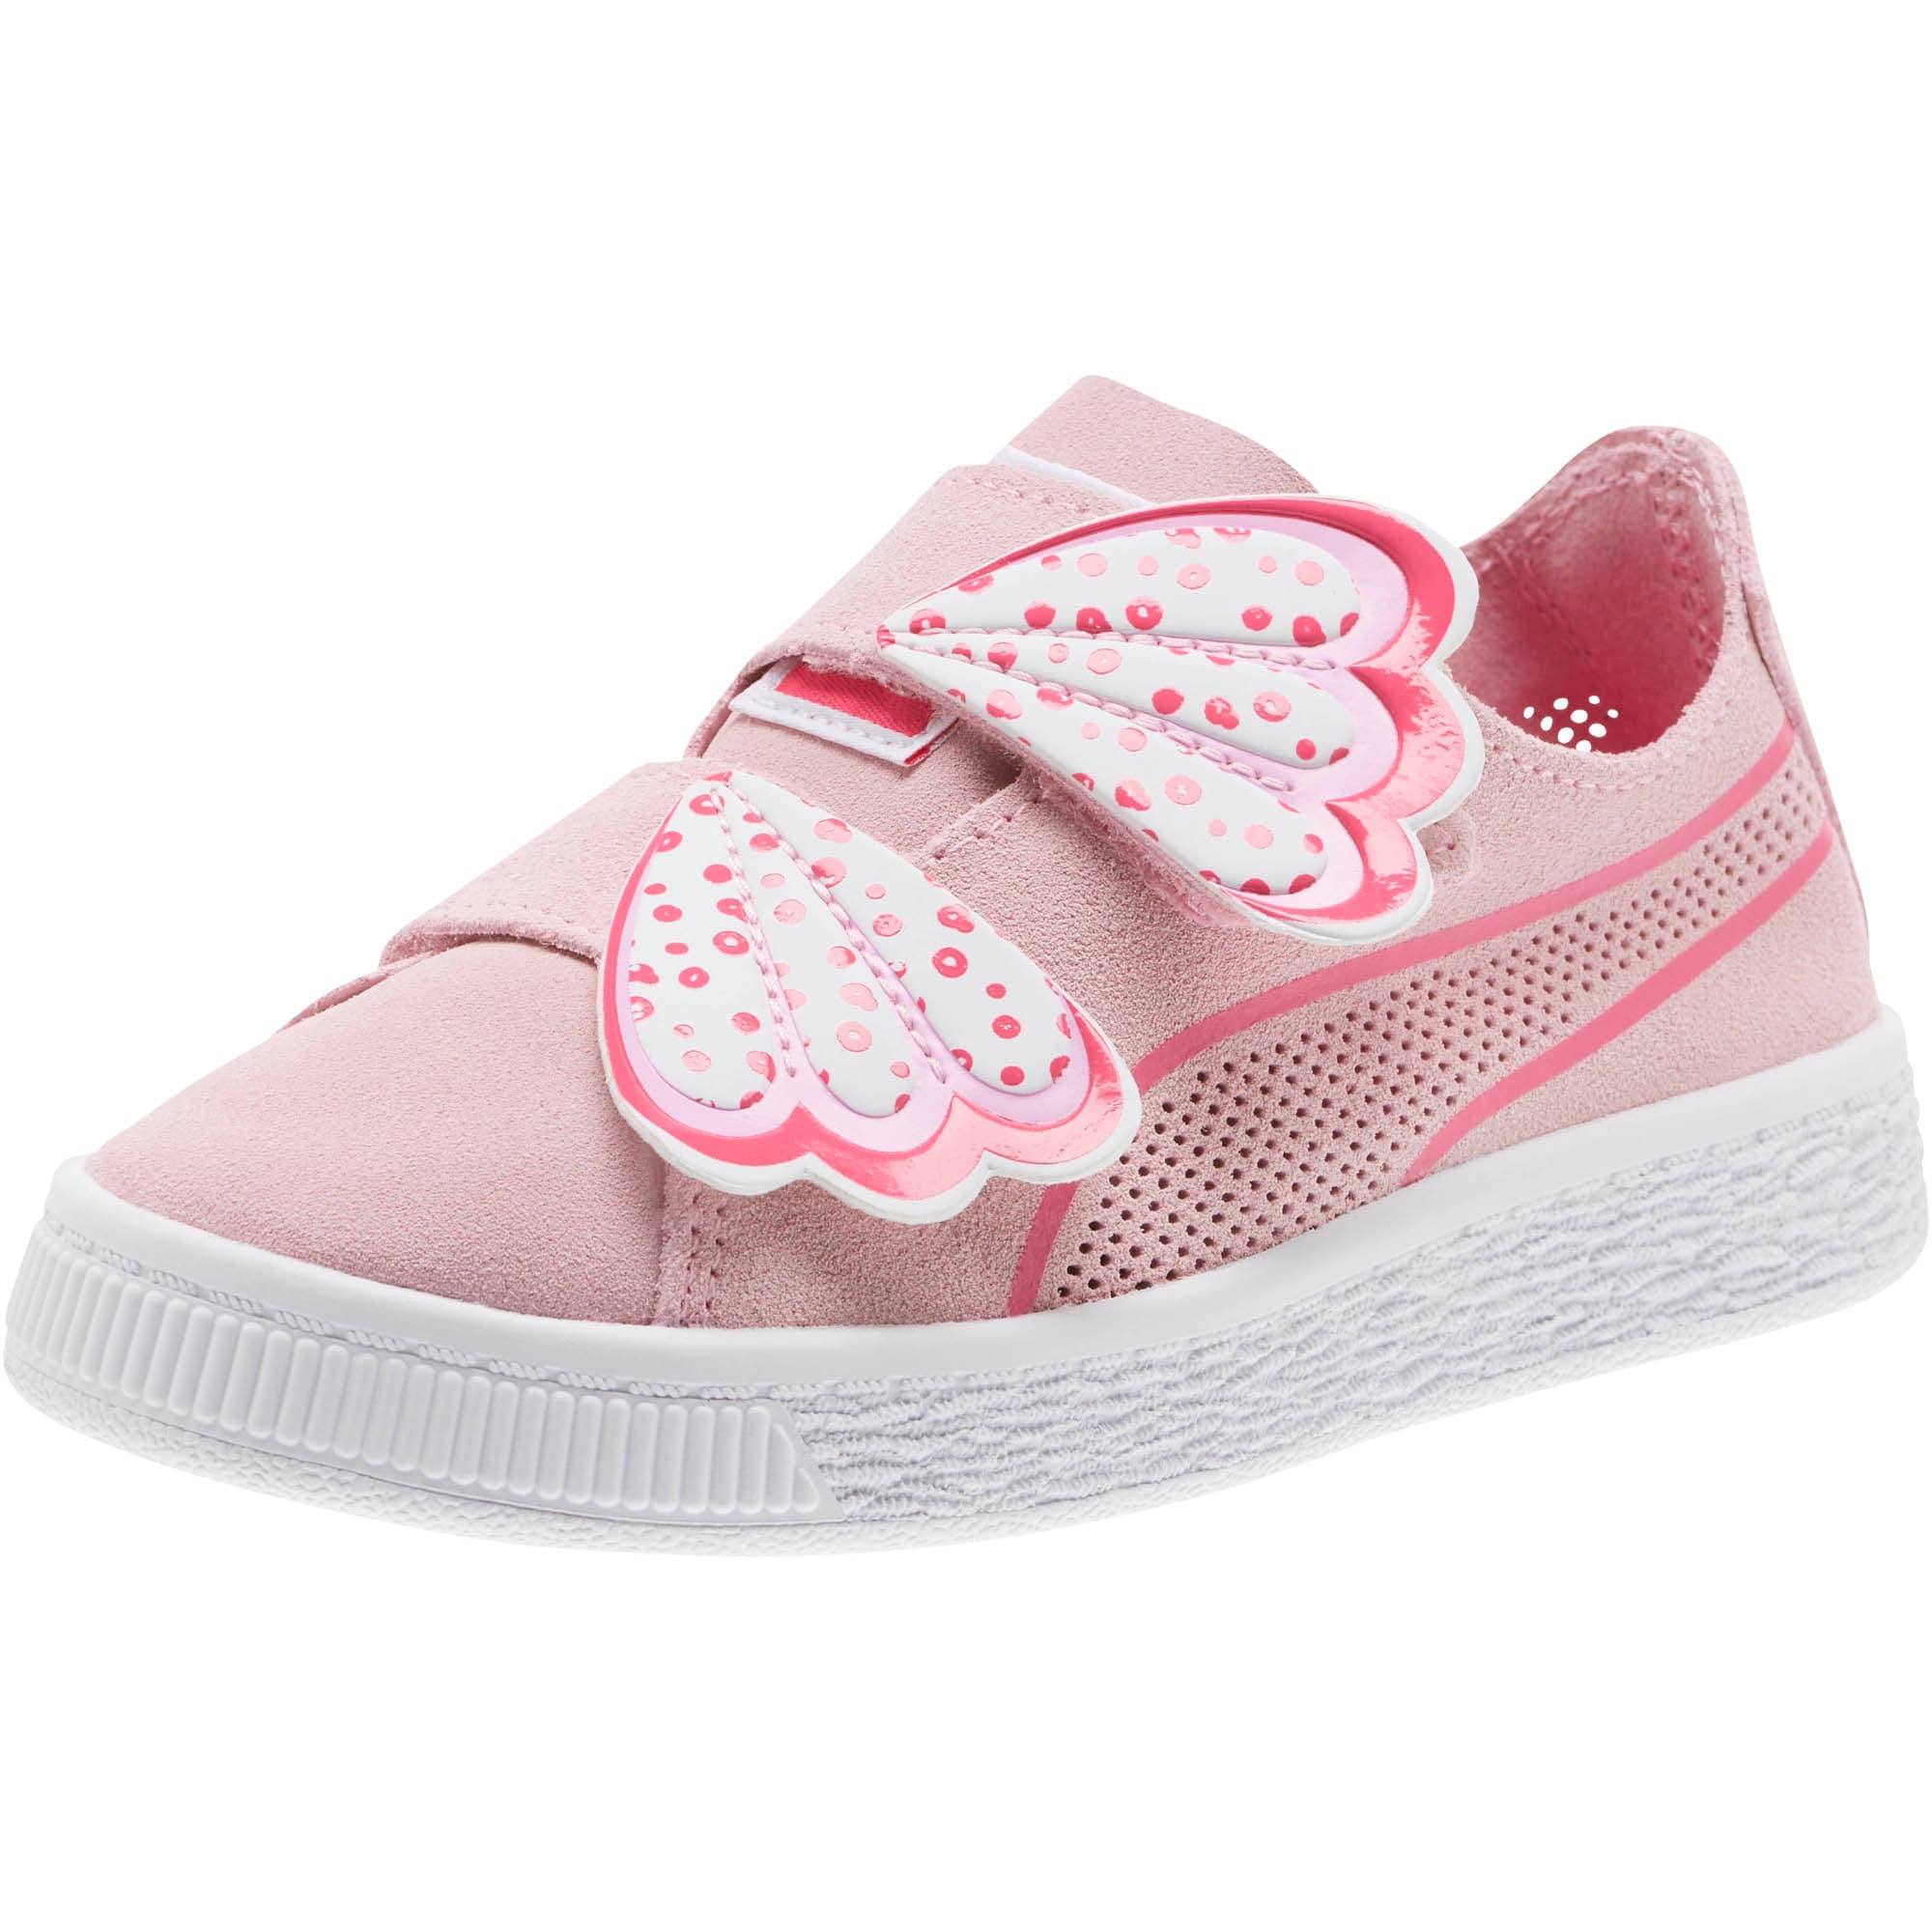 puma butterfly shoes